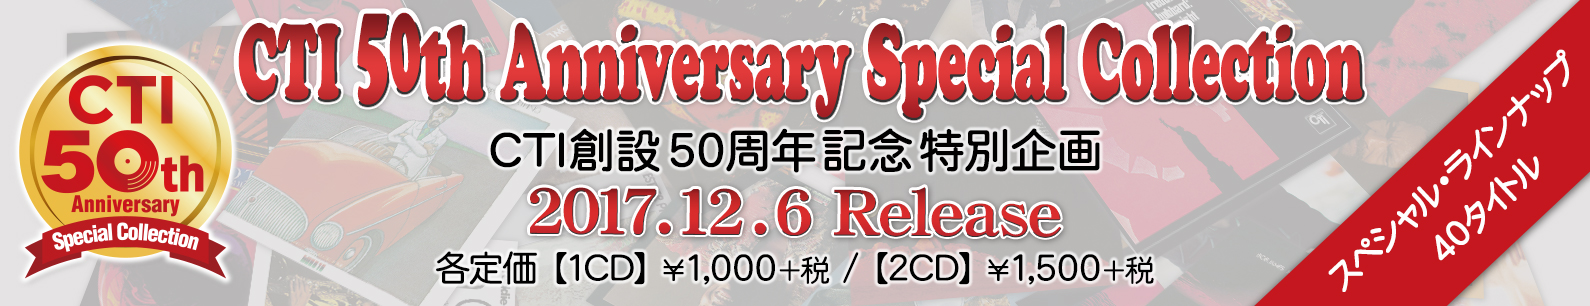 CTI 50th Anniversary Special Collection